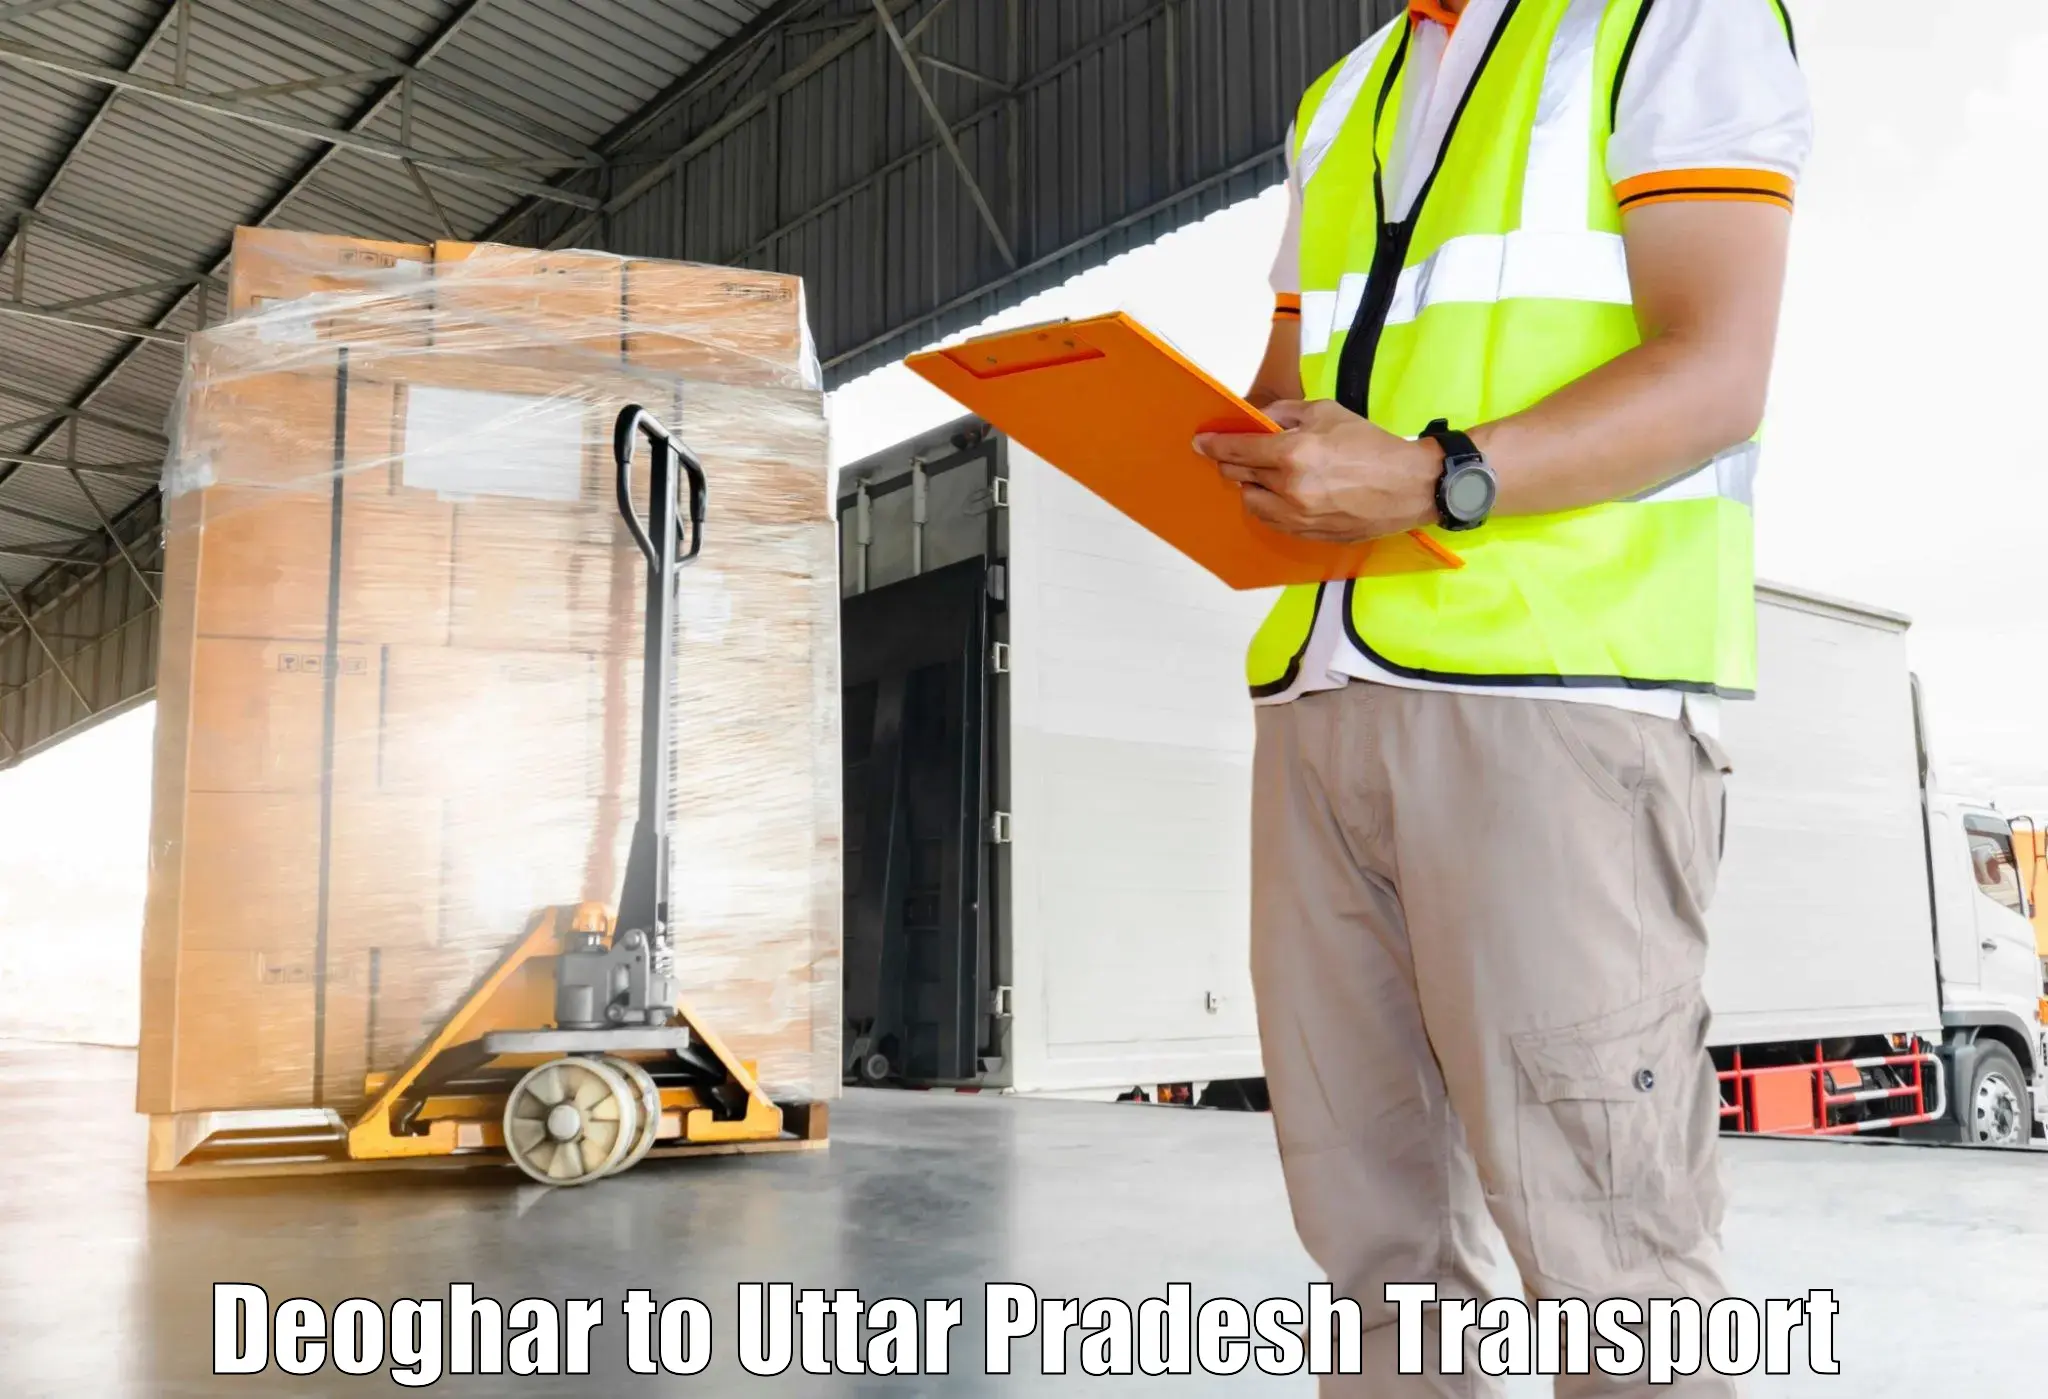 Domestic goods transportation services Deoghar to Kanpur